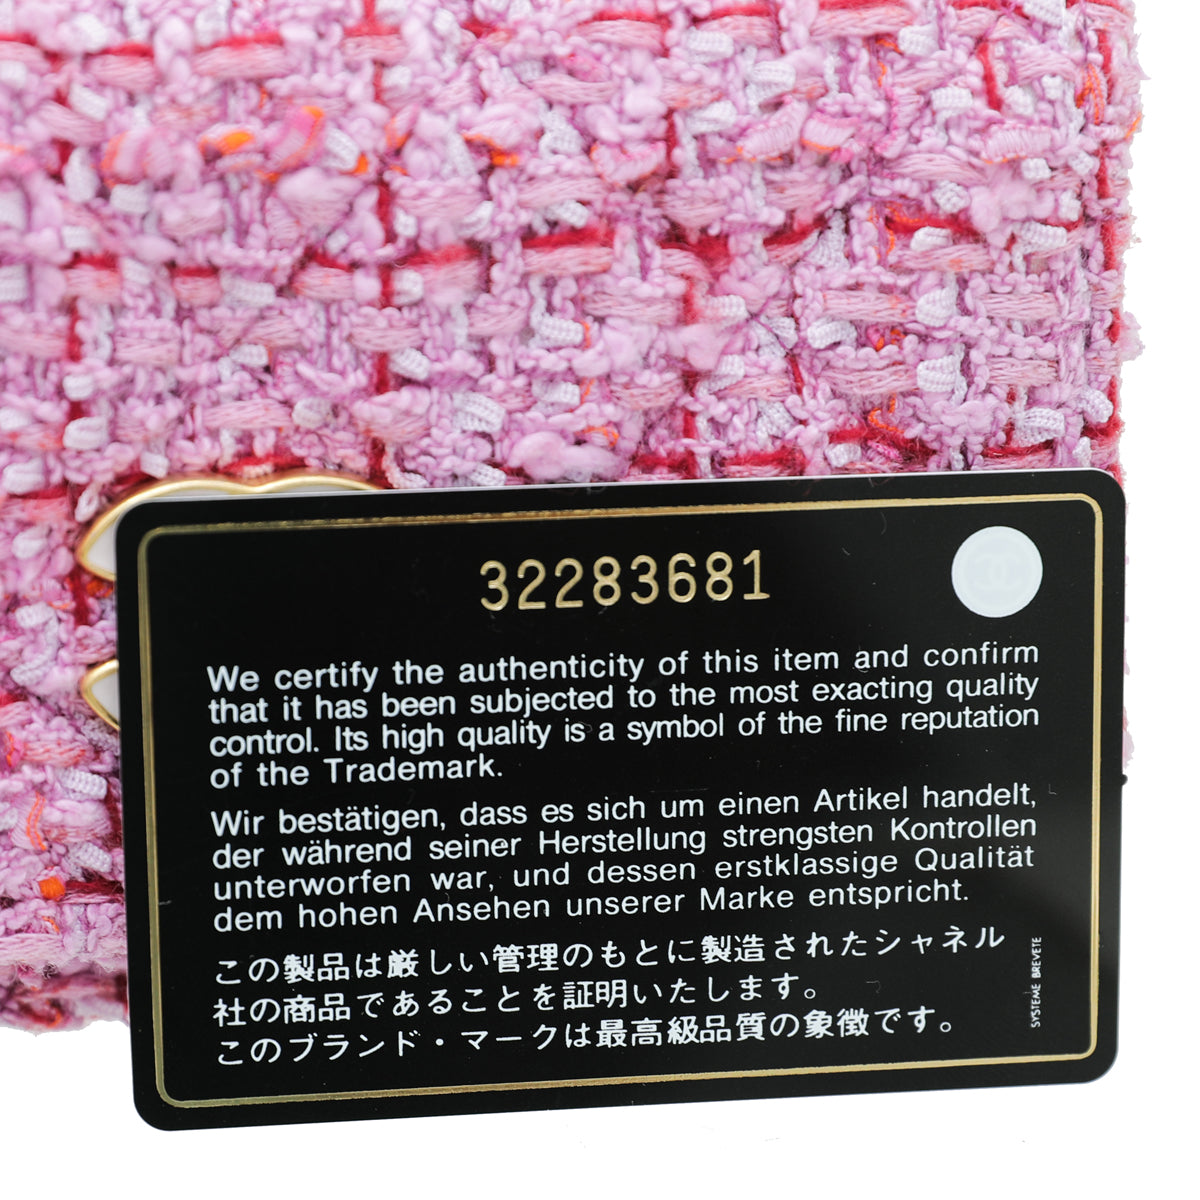 Chanel Pink Tweed Enamel Quilted Pending CC Mini Wallet on Chain